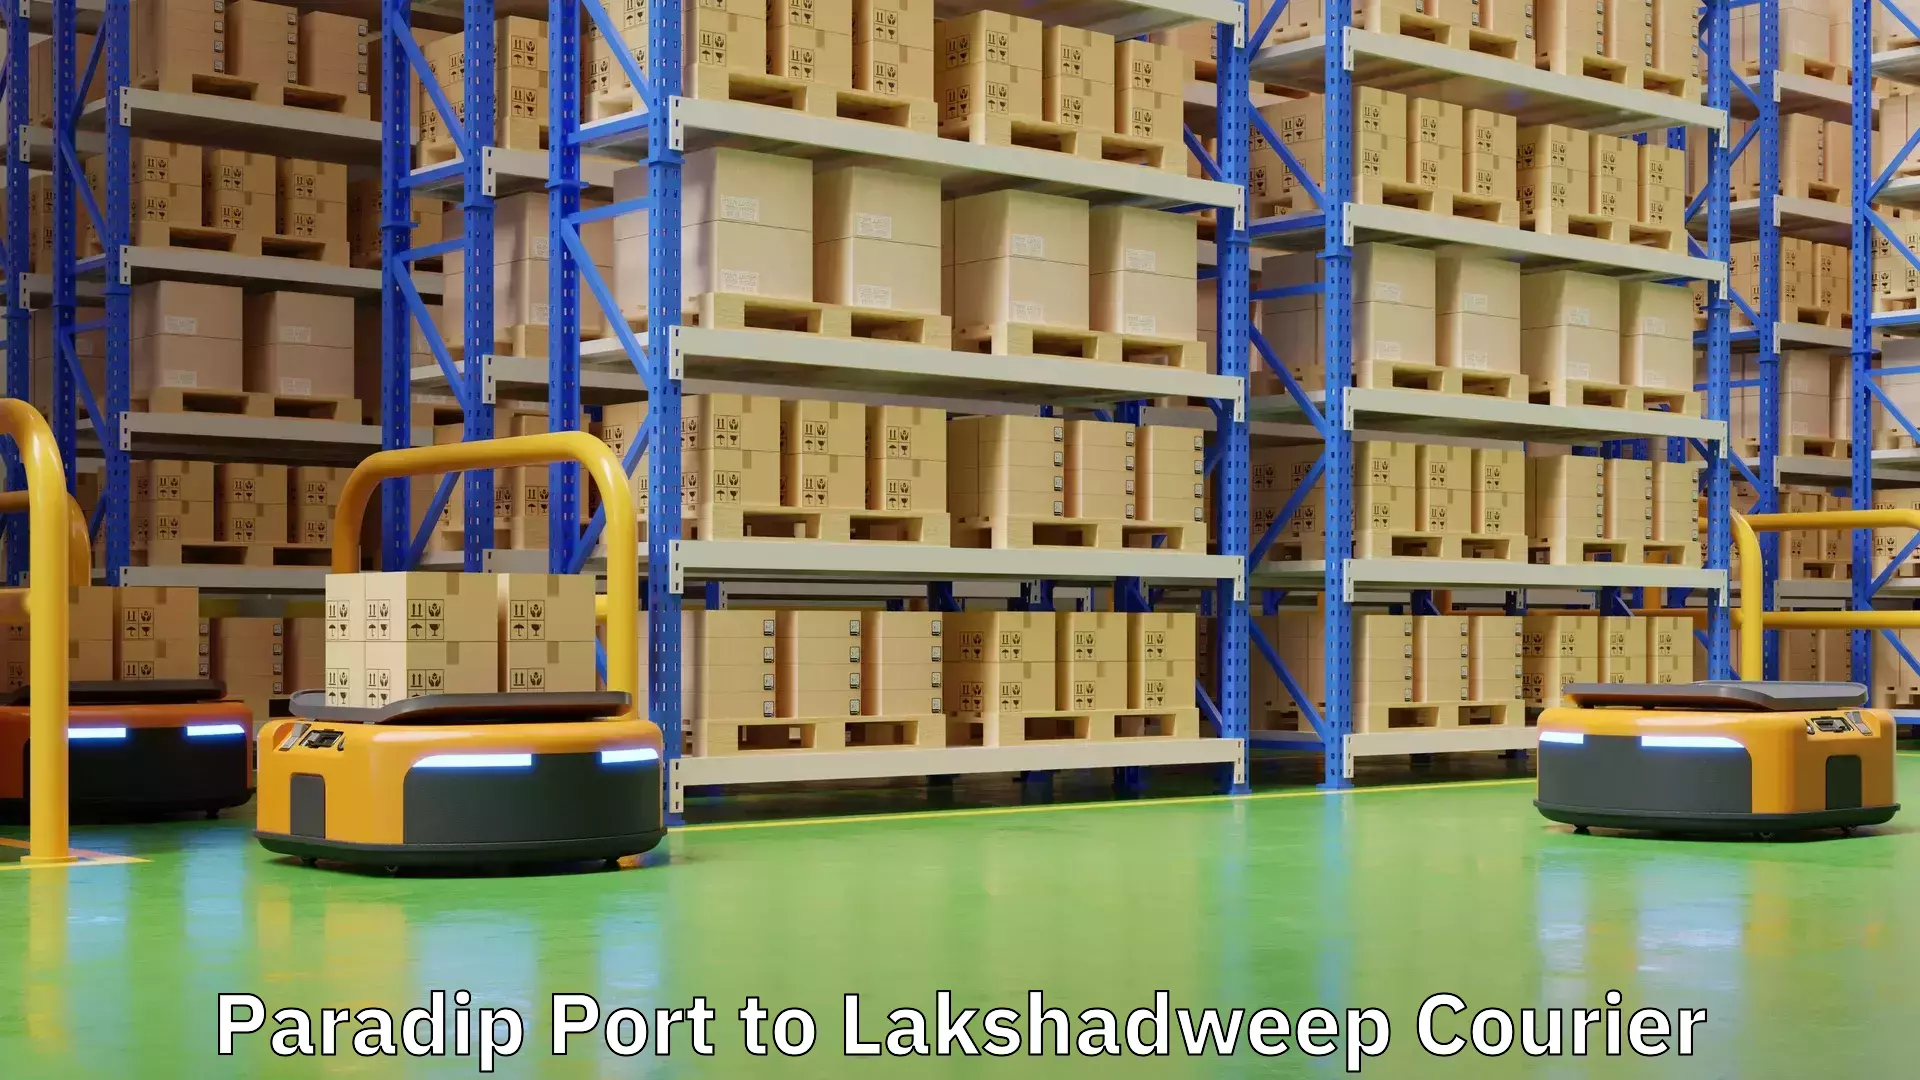 High-priority parcel service Paradip Port to Lakshadweep